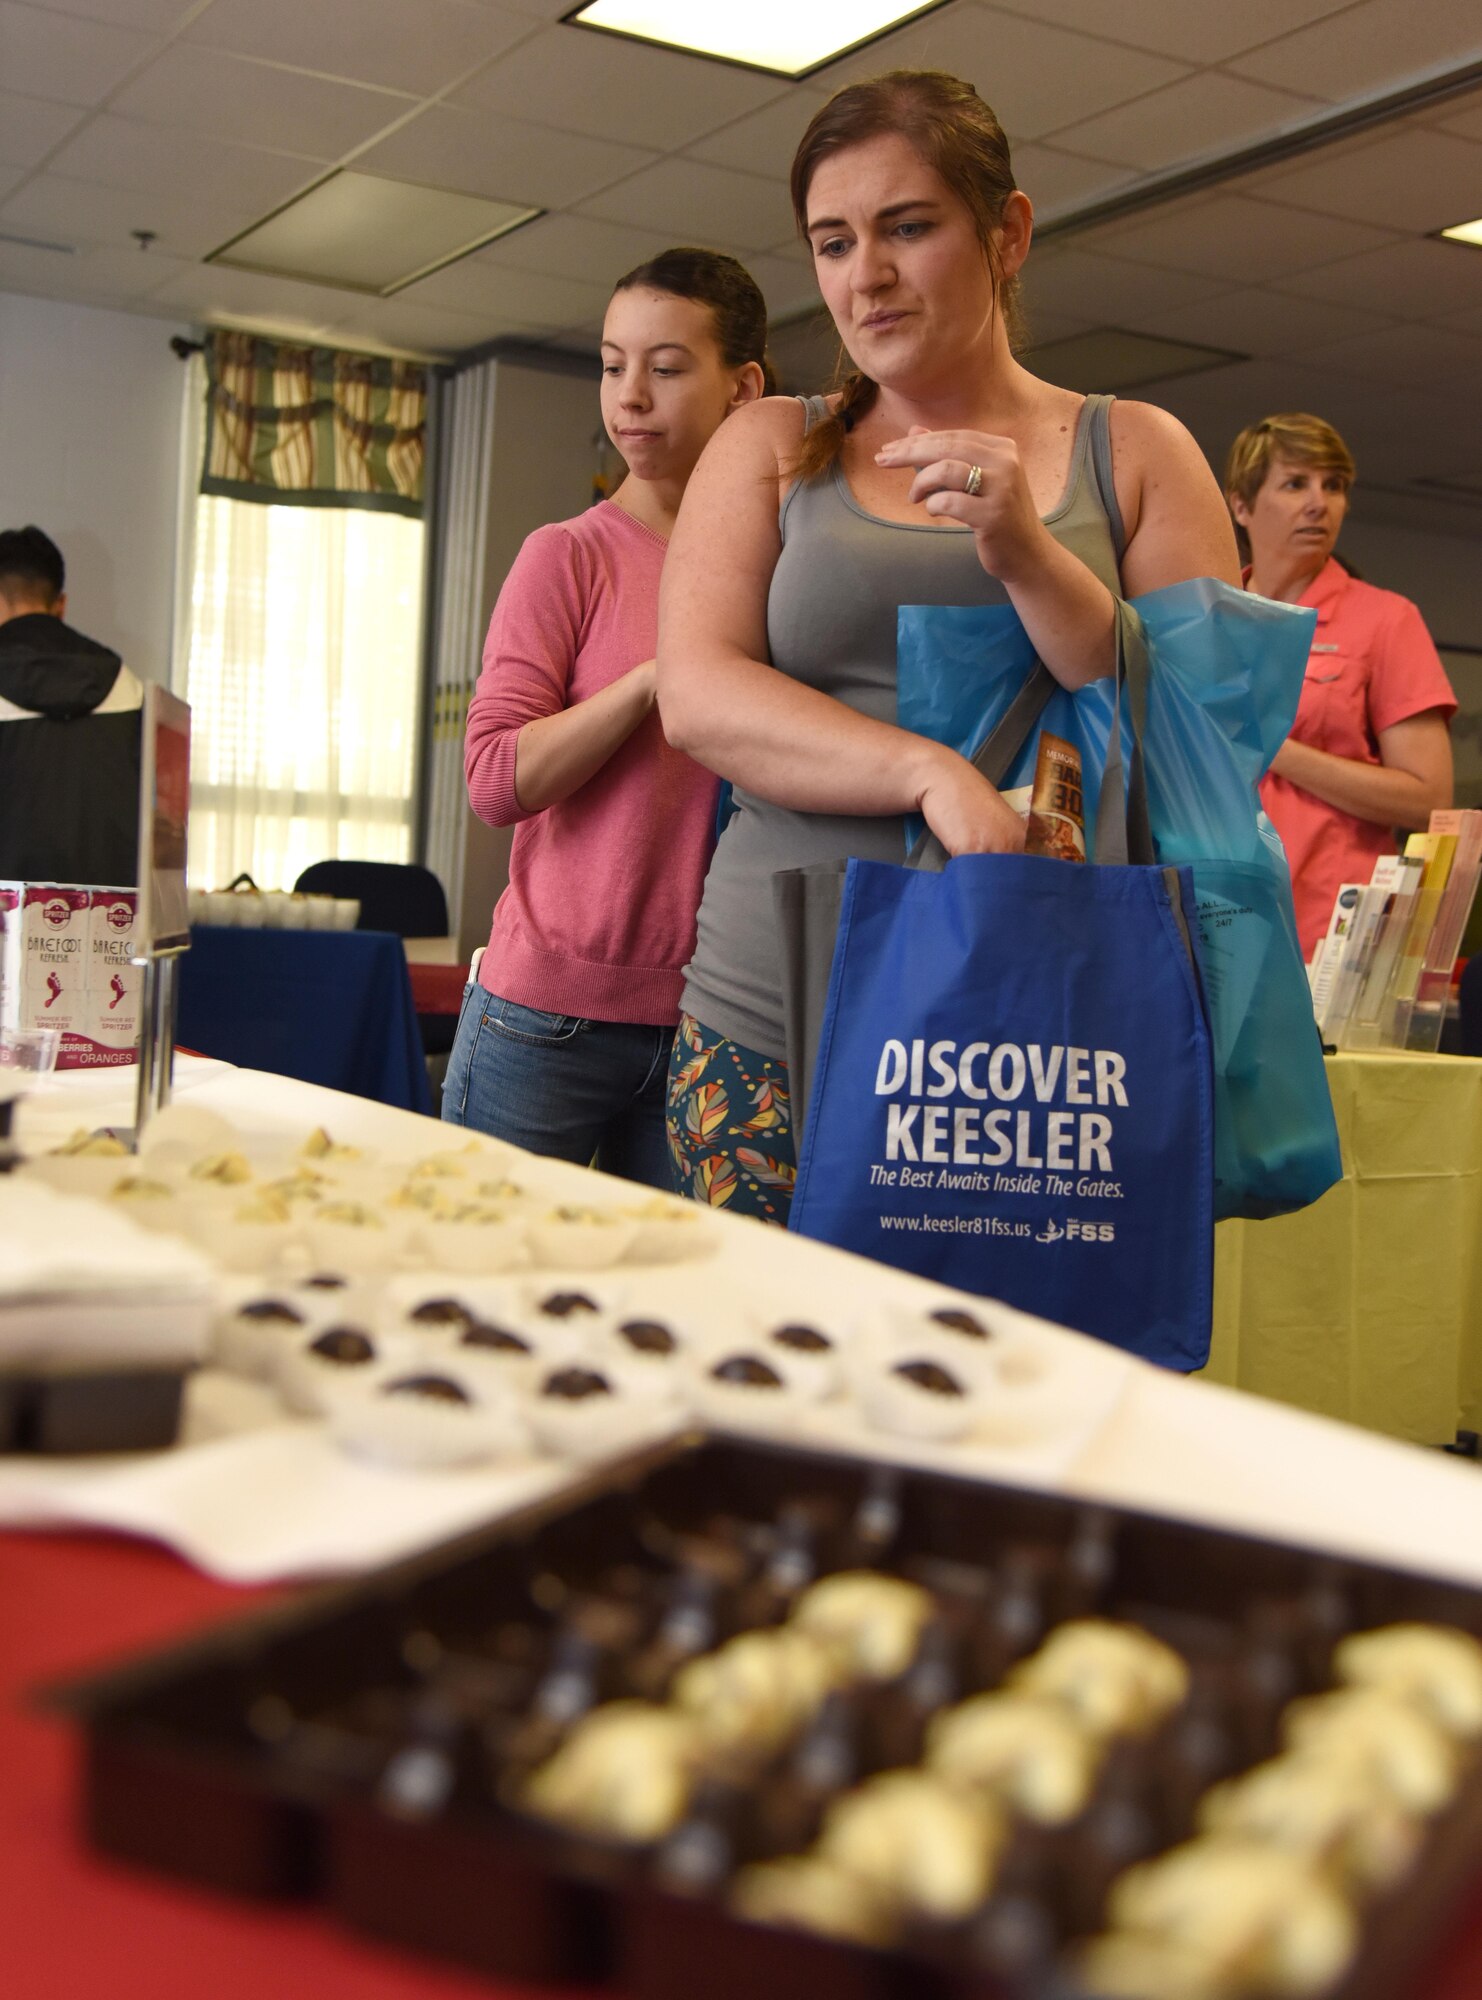 Kayla Dessormeau, spouse of Airman Basic Andrew Dessormeau, 338th Training Squadron student, and Melissa Stip, spouse of Airman 1st Class Scott Stip, 338th TRS student, view chocolate samples during Pamper Me Day at the Sablich Center May 4, 2017, on Keesler Air Force Base, Miss. Keesler’s Airman and Family Readiness Center has hosted the event for the past 13 years, offering spouses free manicures, make-up styling tips and information and business booths. (U.S. Air Force photo by Kemberly Groue)